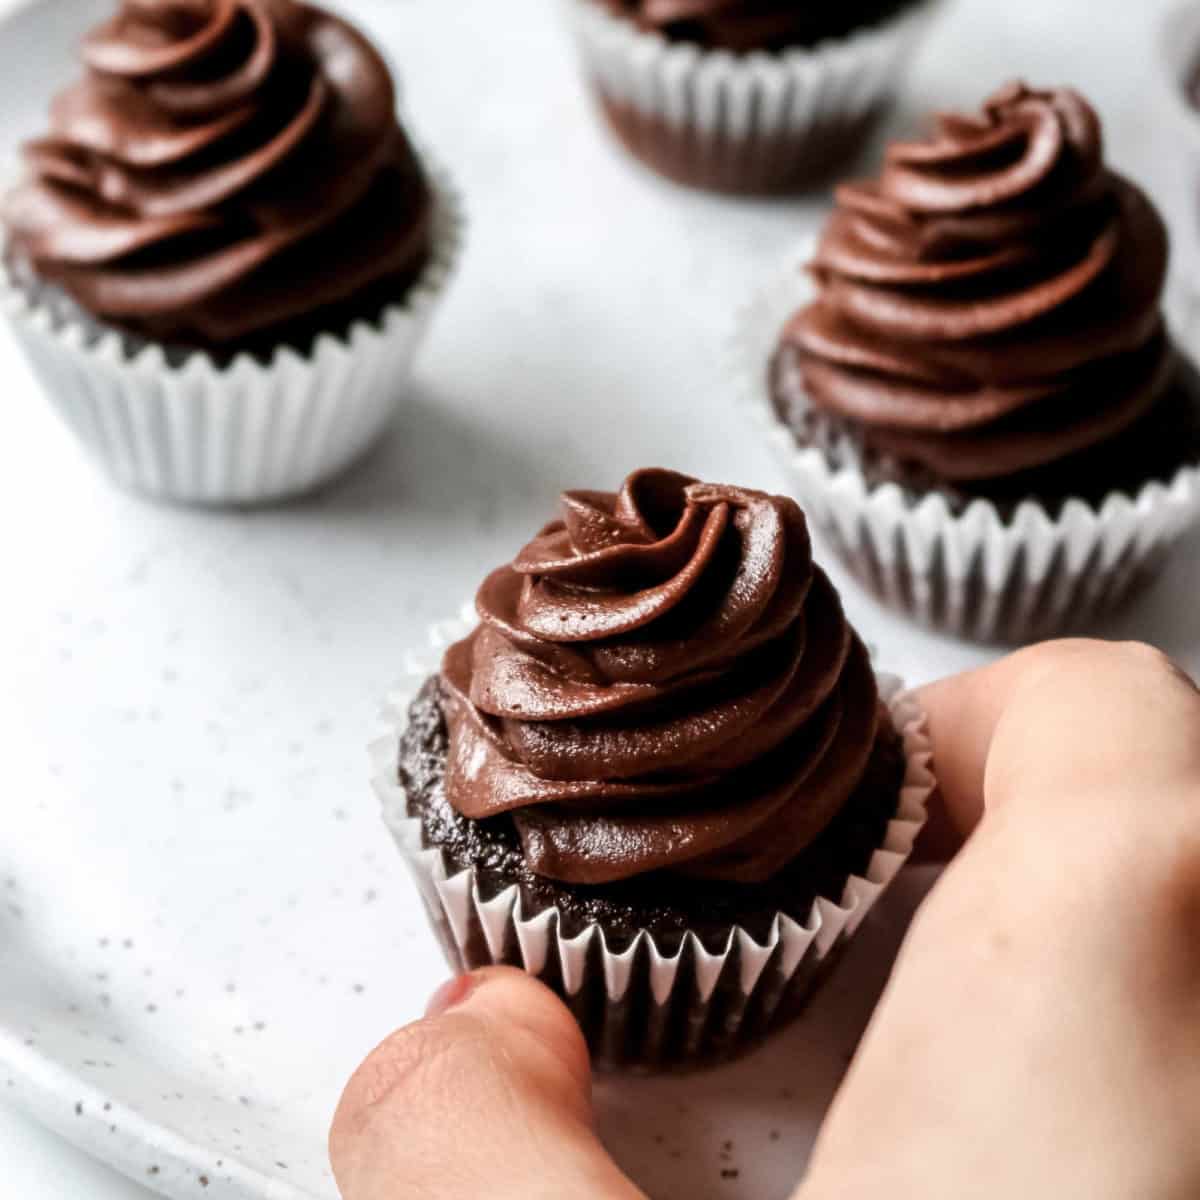 A close up of a hand holding a small chocolate cupcake.